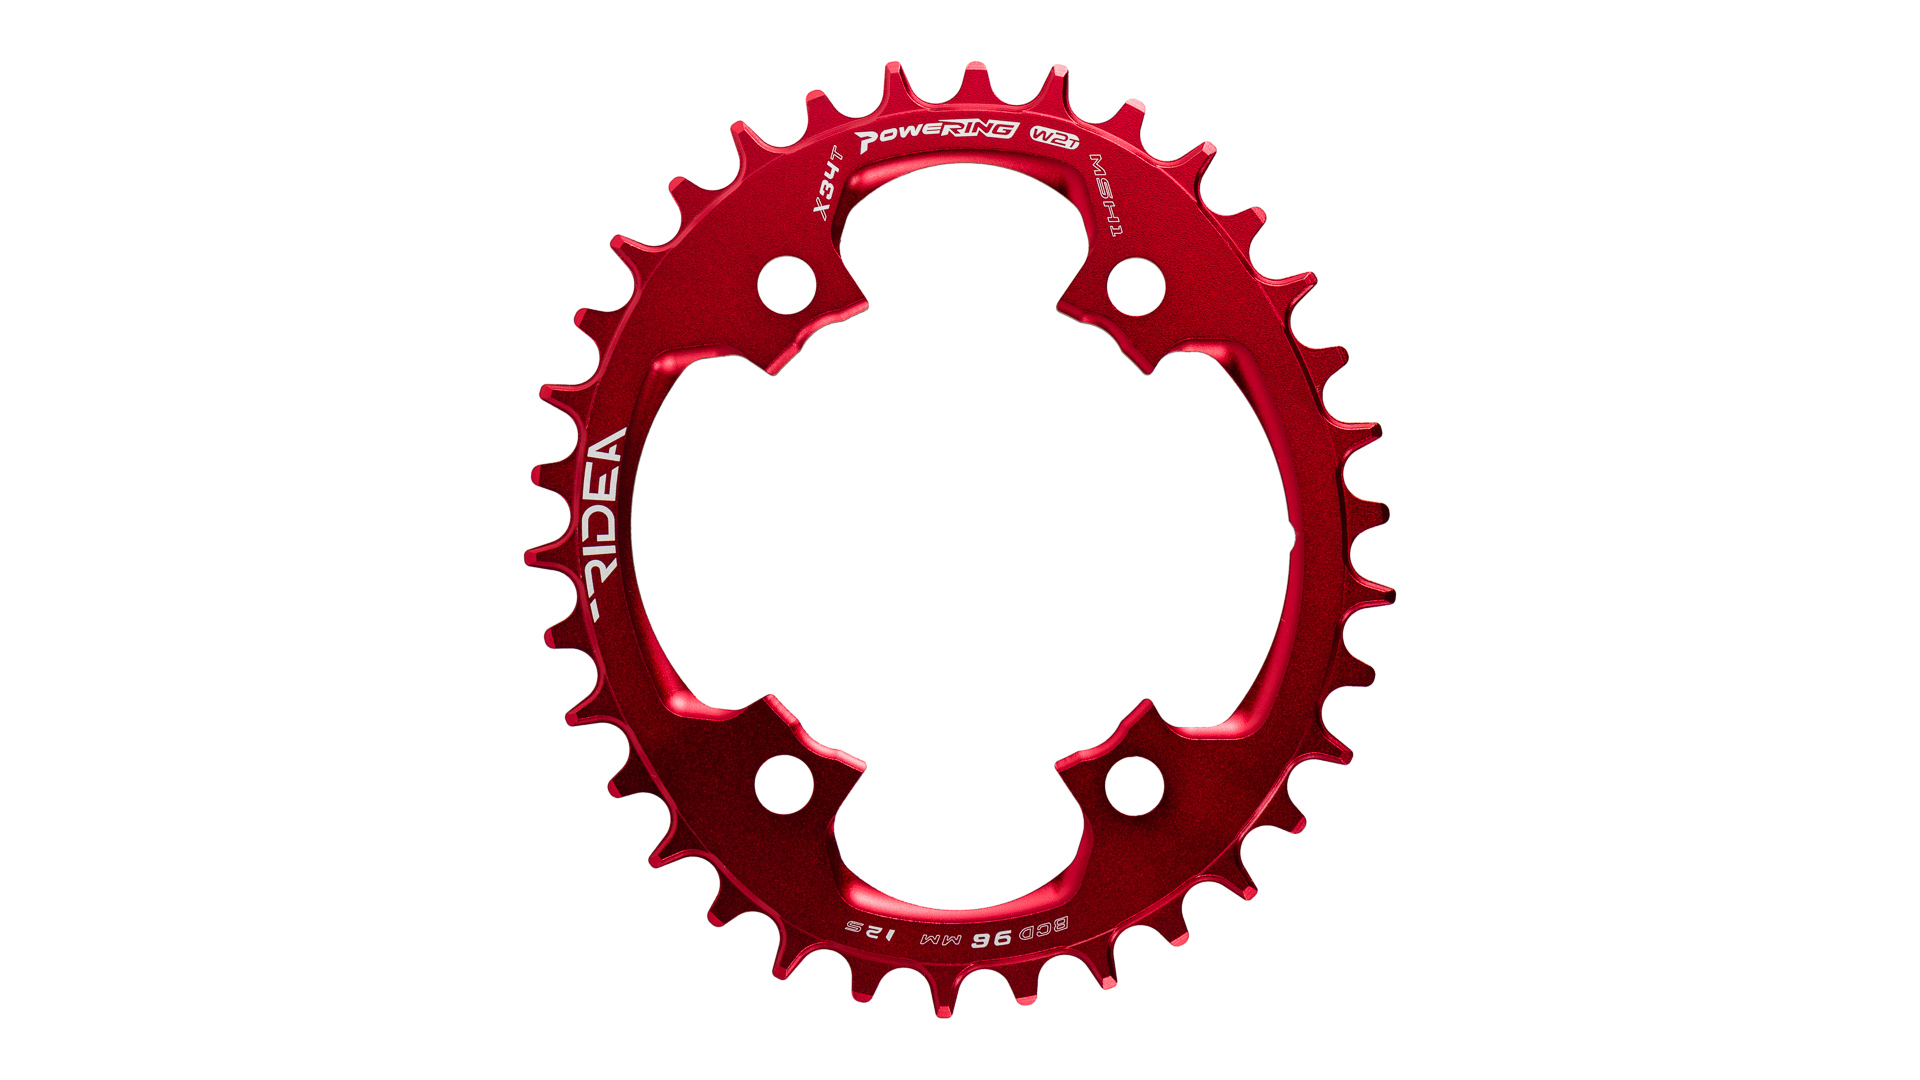 MSH1 chainrings